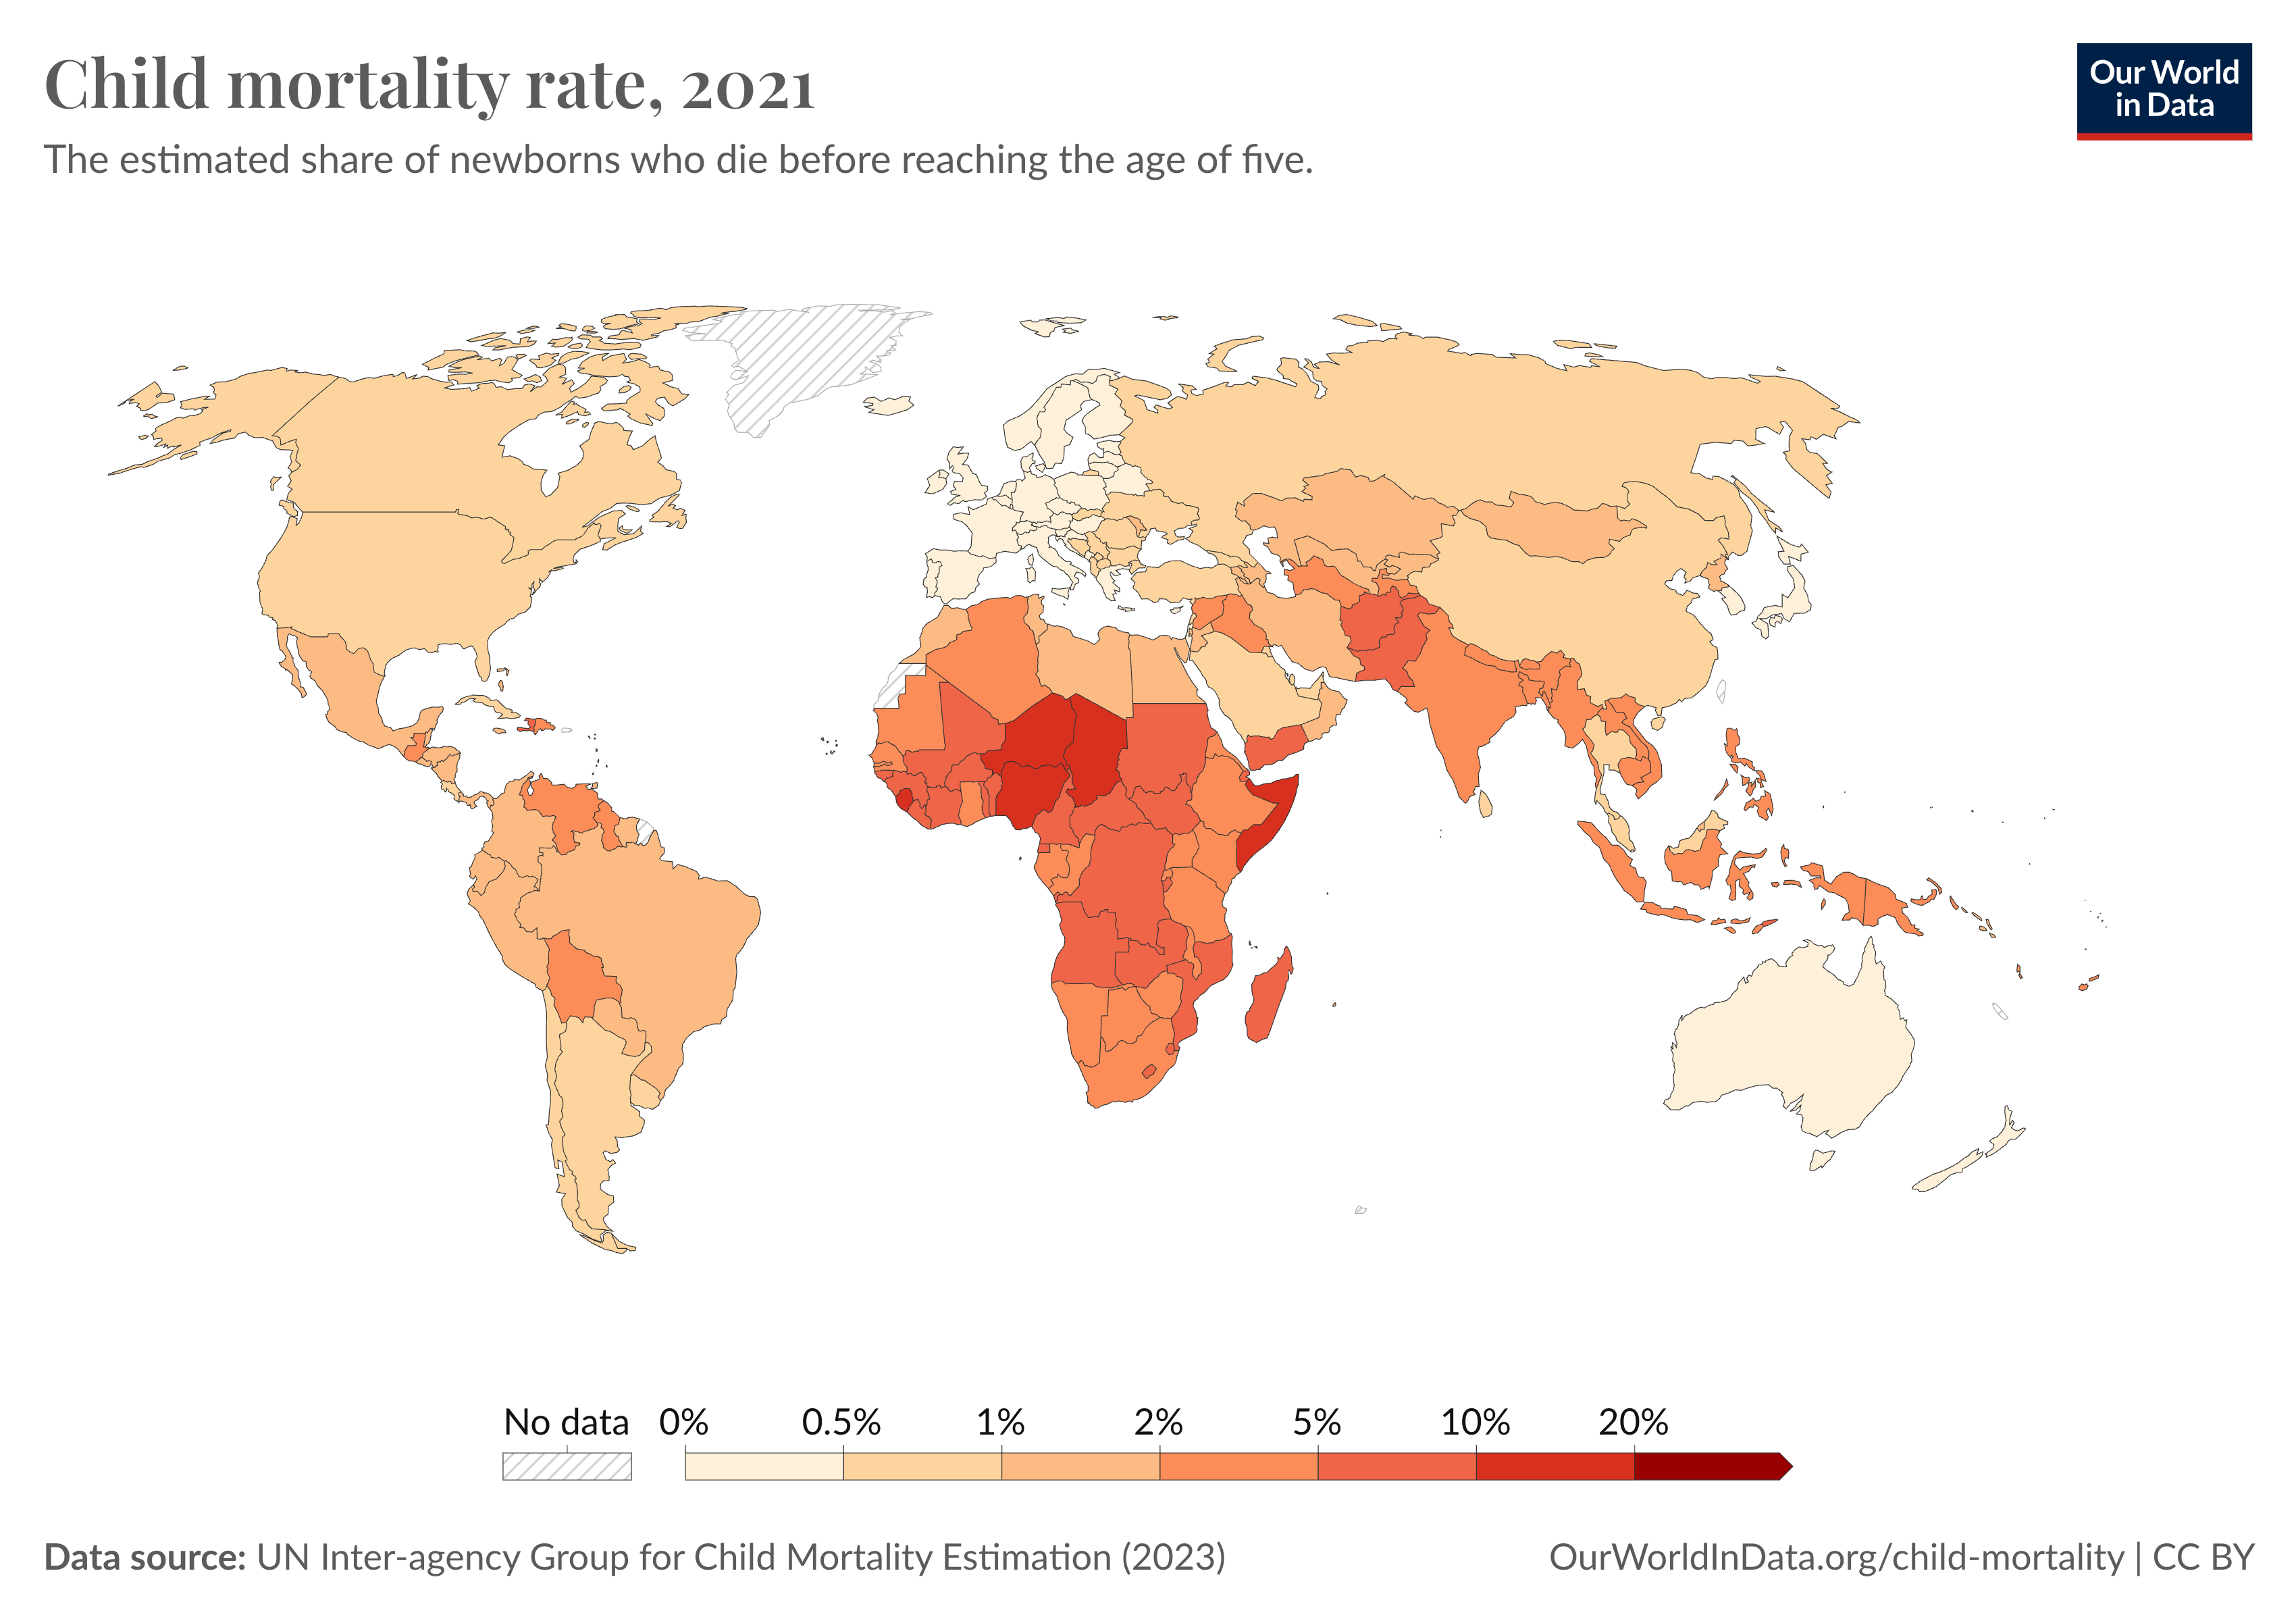 This world map titled "Child mortality rate, 2021," visually conveys the estimated share of newborns who die before age five in each country. The color-coding of the countries reveals that Central Africa experiences the highest child mortality rates, indicated by the darkest shades. The bottom of the image credits the "UN Inter-agency Group for Child Mortality Estimation (2023)" as the source of the data.